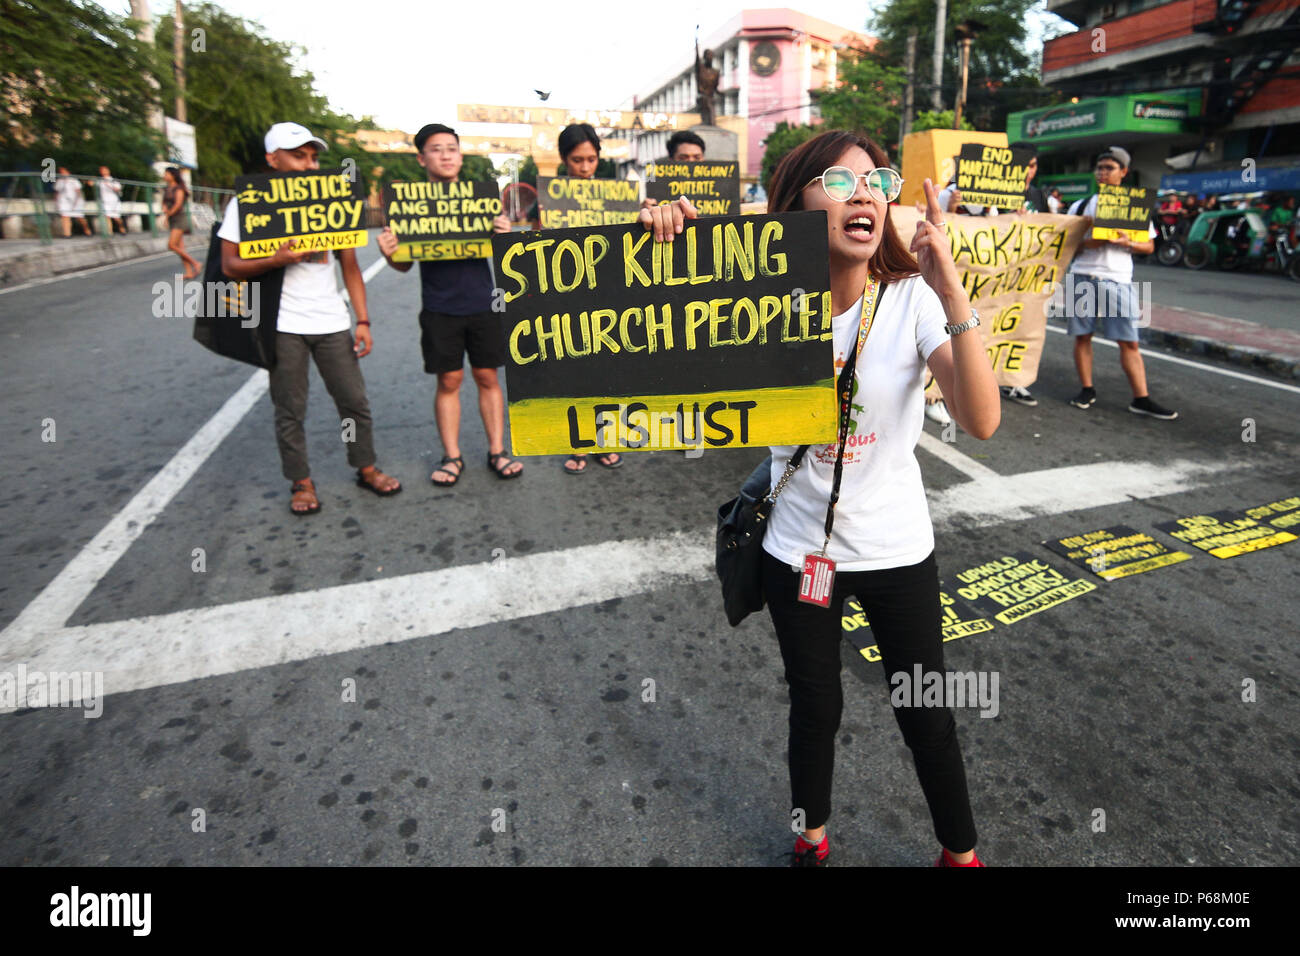 Manila, Philippines. 29th June, 2018. Students from the University of Santo Thomas staged a lightning rally near the presidential palace in Mendiola, Friday afternoon, against the recent deaths of Catholic priests. Part of the nationwide Black Friday protests, the students called for justice for Genesis ''Tisoy'' Argoncillo's death while in police detention for loitering. The group also called for the end of the Martial Law in Mindanao. Credit: J Gerard Seguia/ZUMA Wire/Alamy Live News Stock Photo